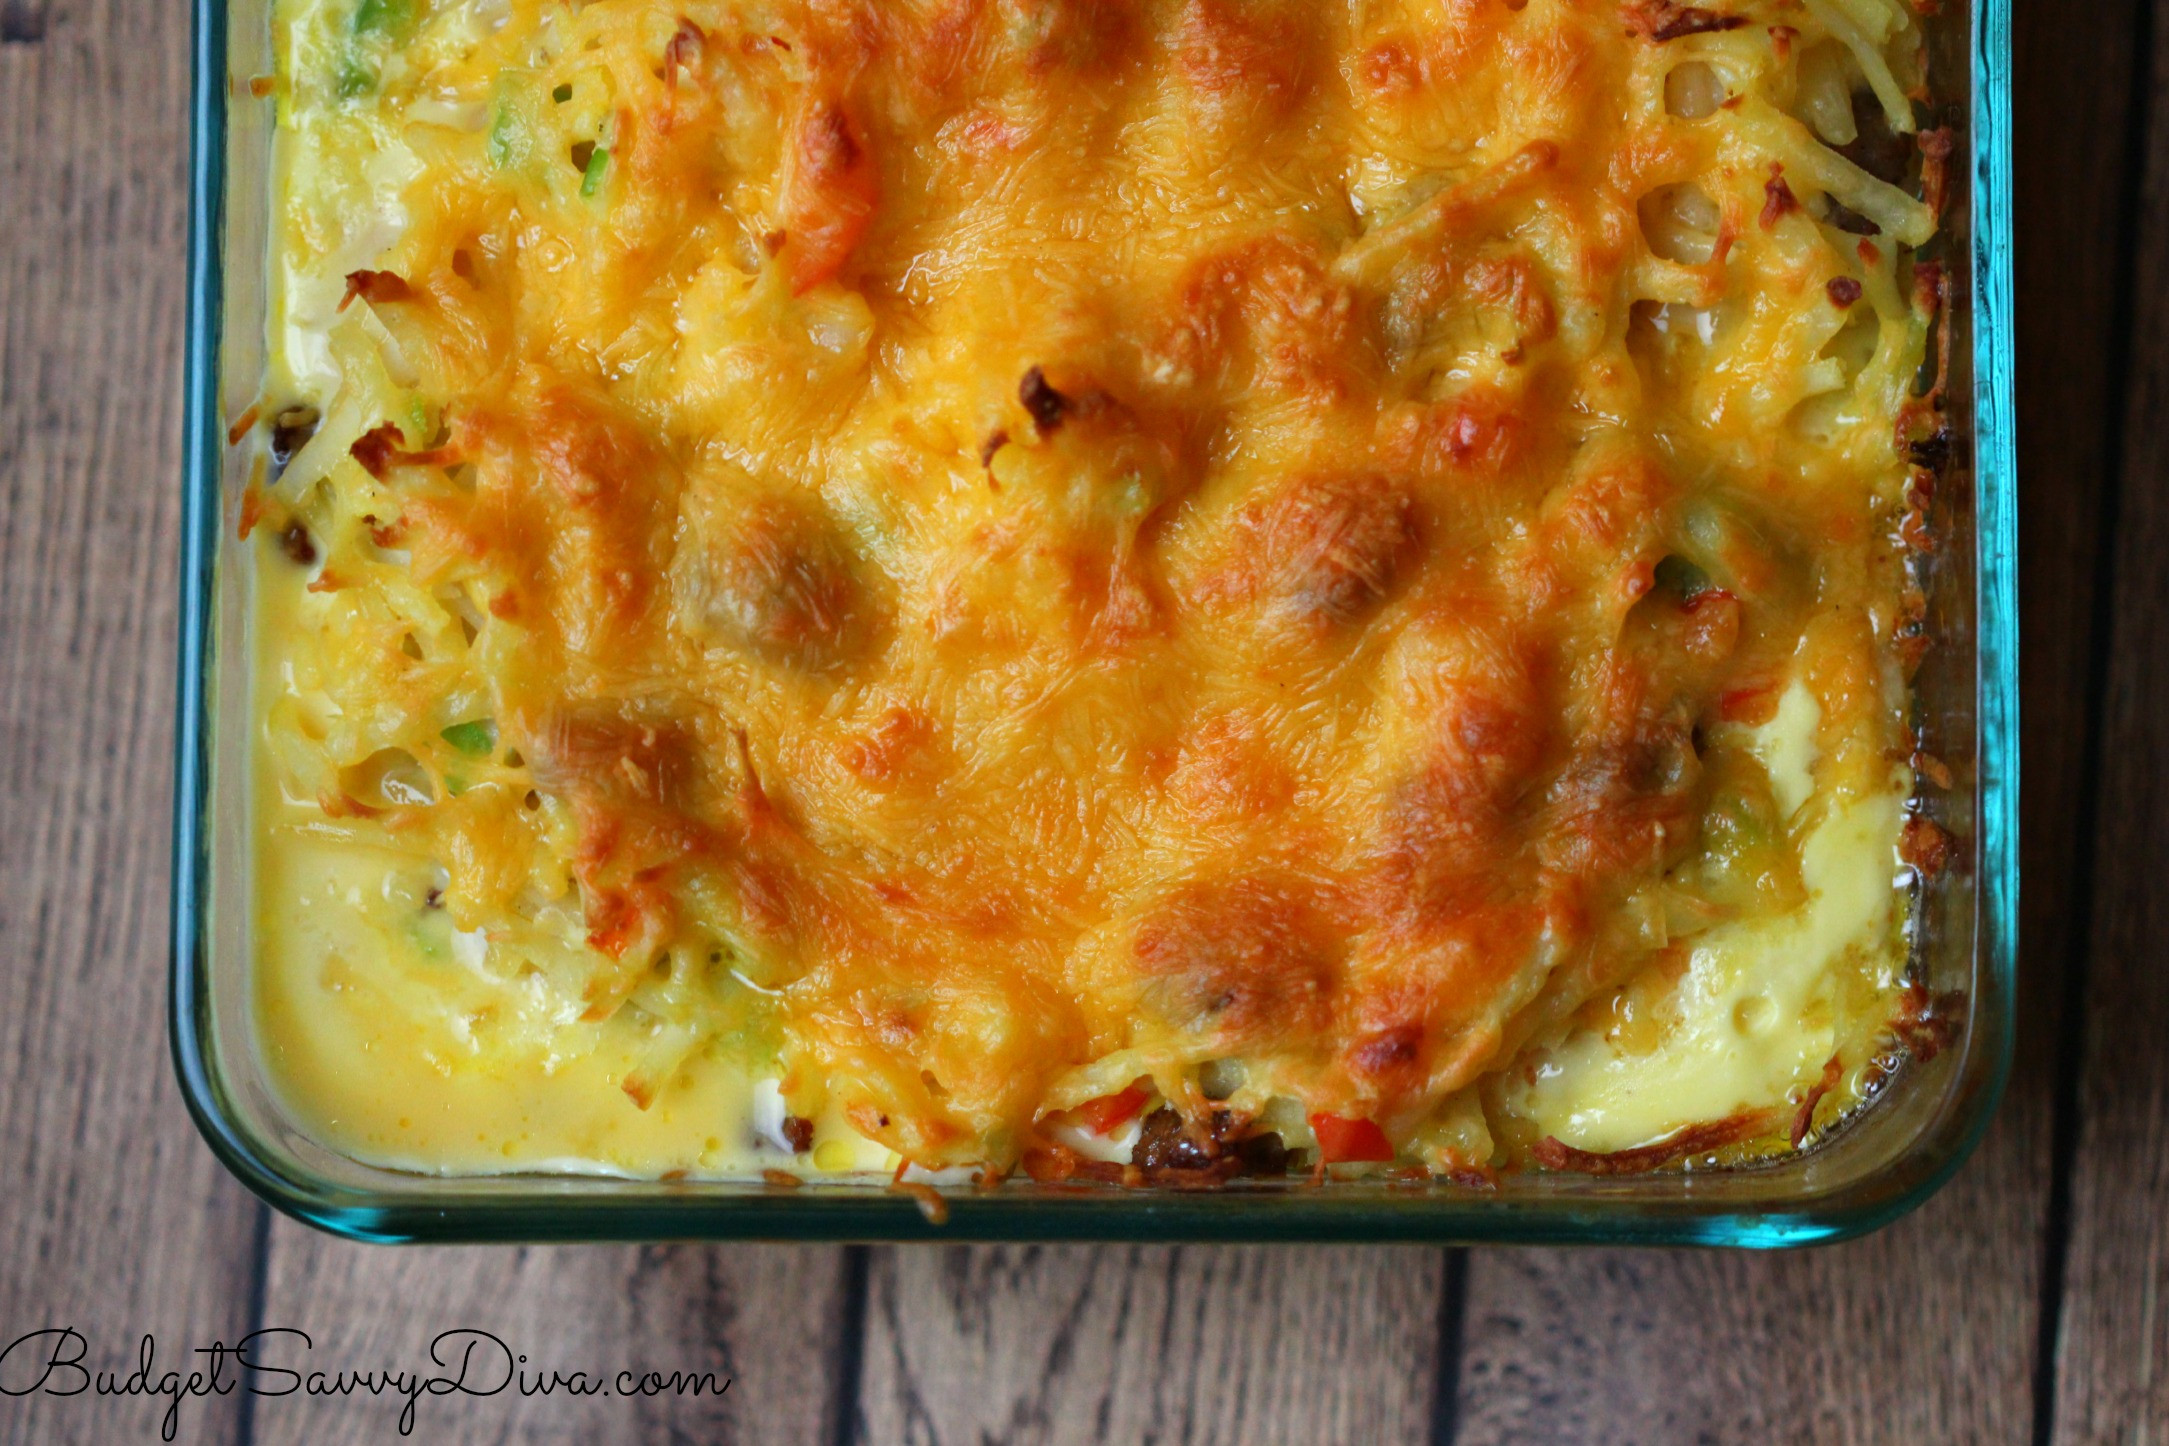 Breakfast Casserole Recipes With Sausage
 Cheesy Sausage Breakfast Casserole Recipe